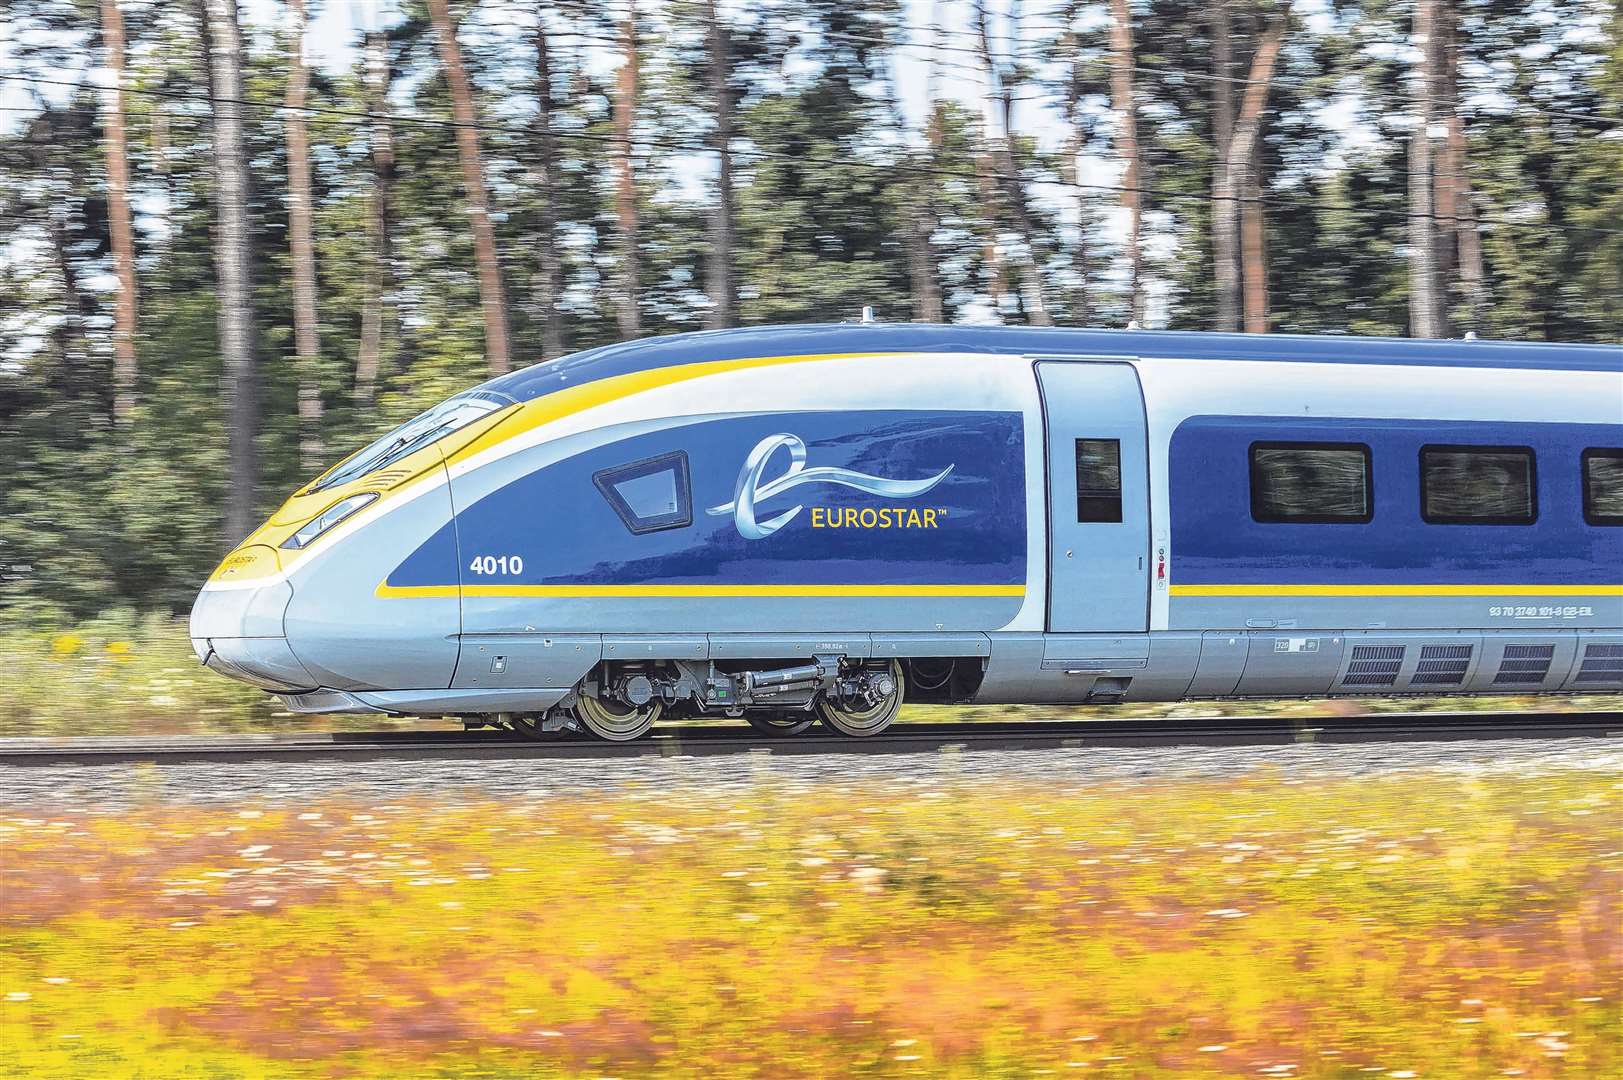 Churchill operates the cleaning contracts for all major train services running in the county - including Eurostar